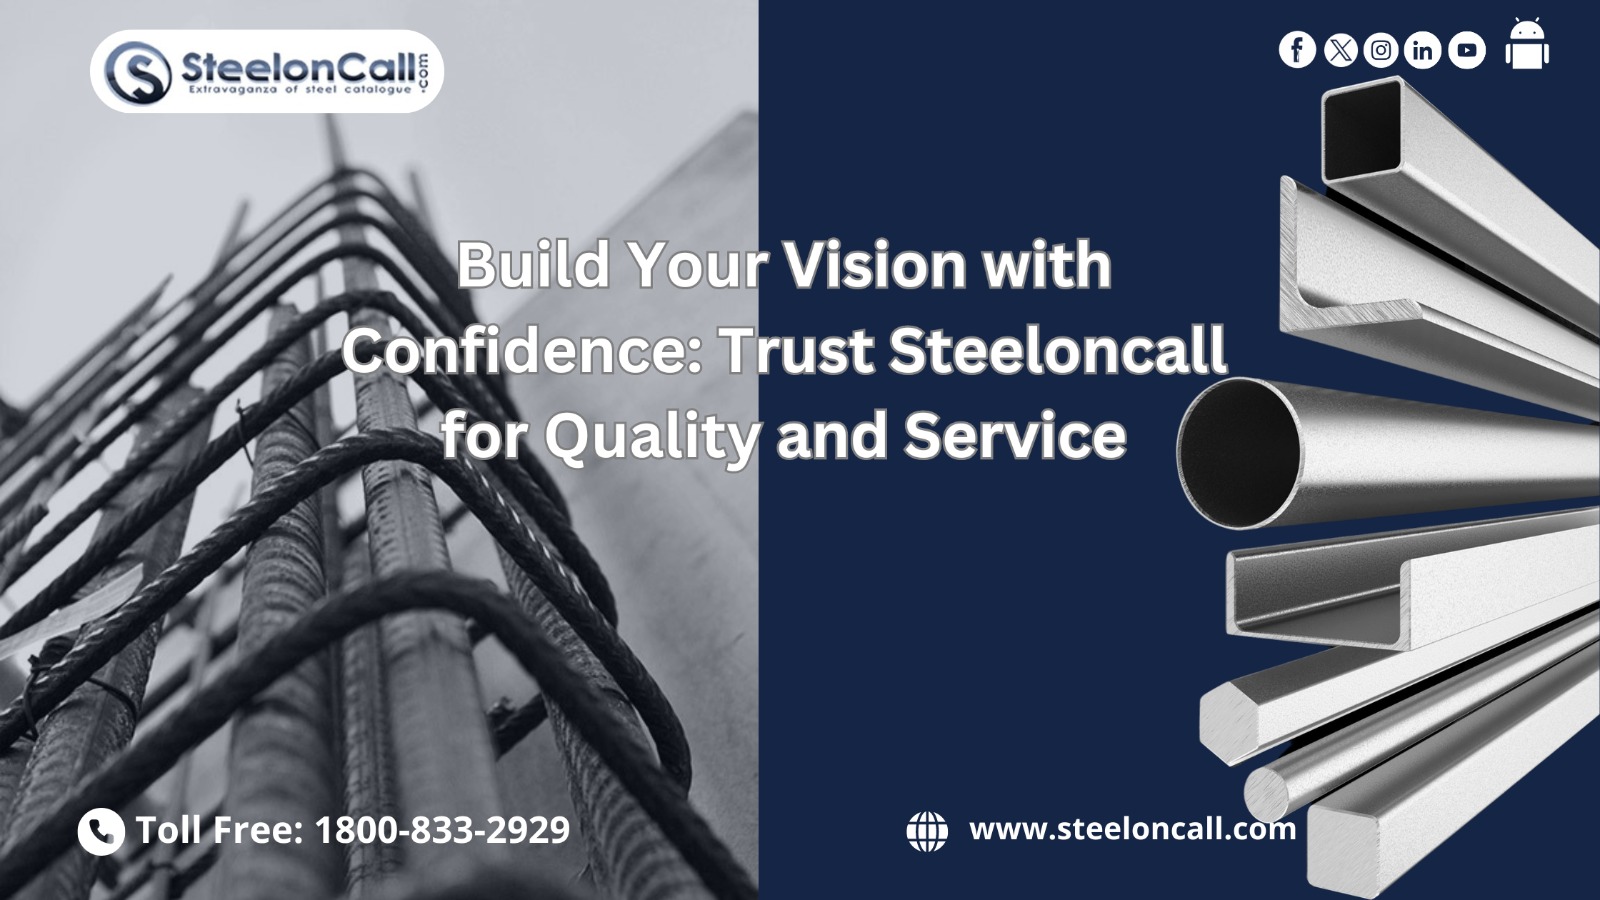 Build Your Vision with Confidence: Trust Steeloncall for Quality and Service